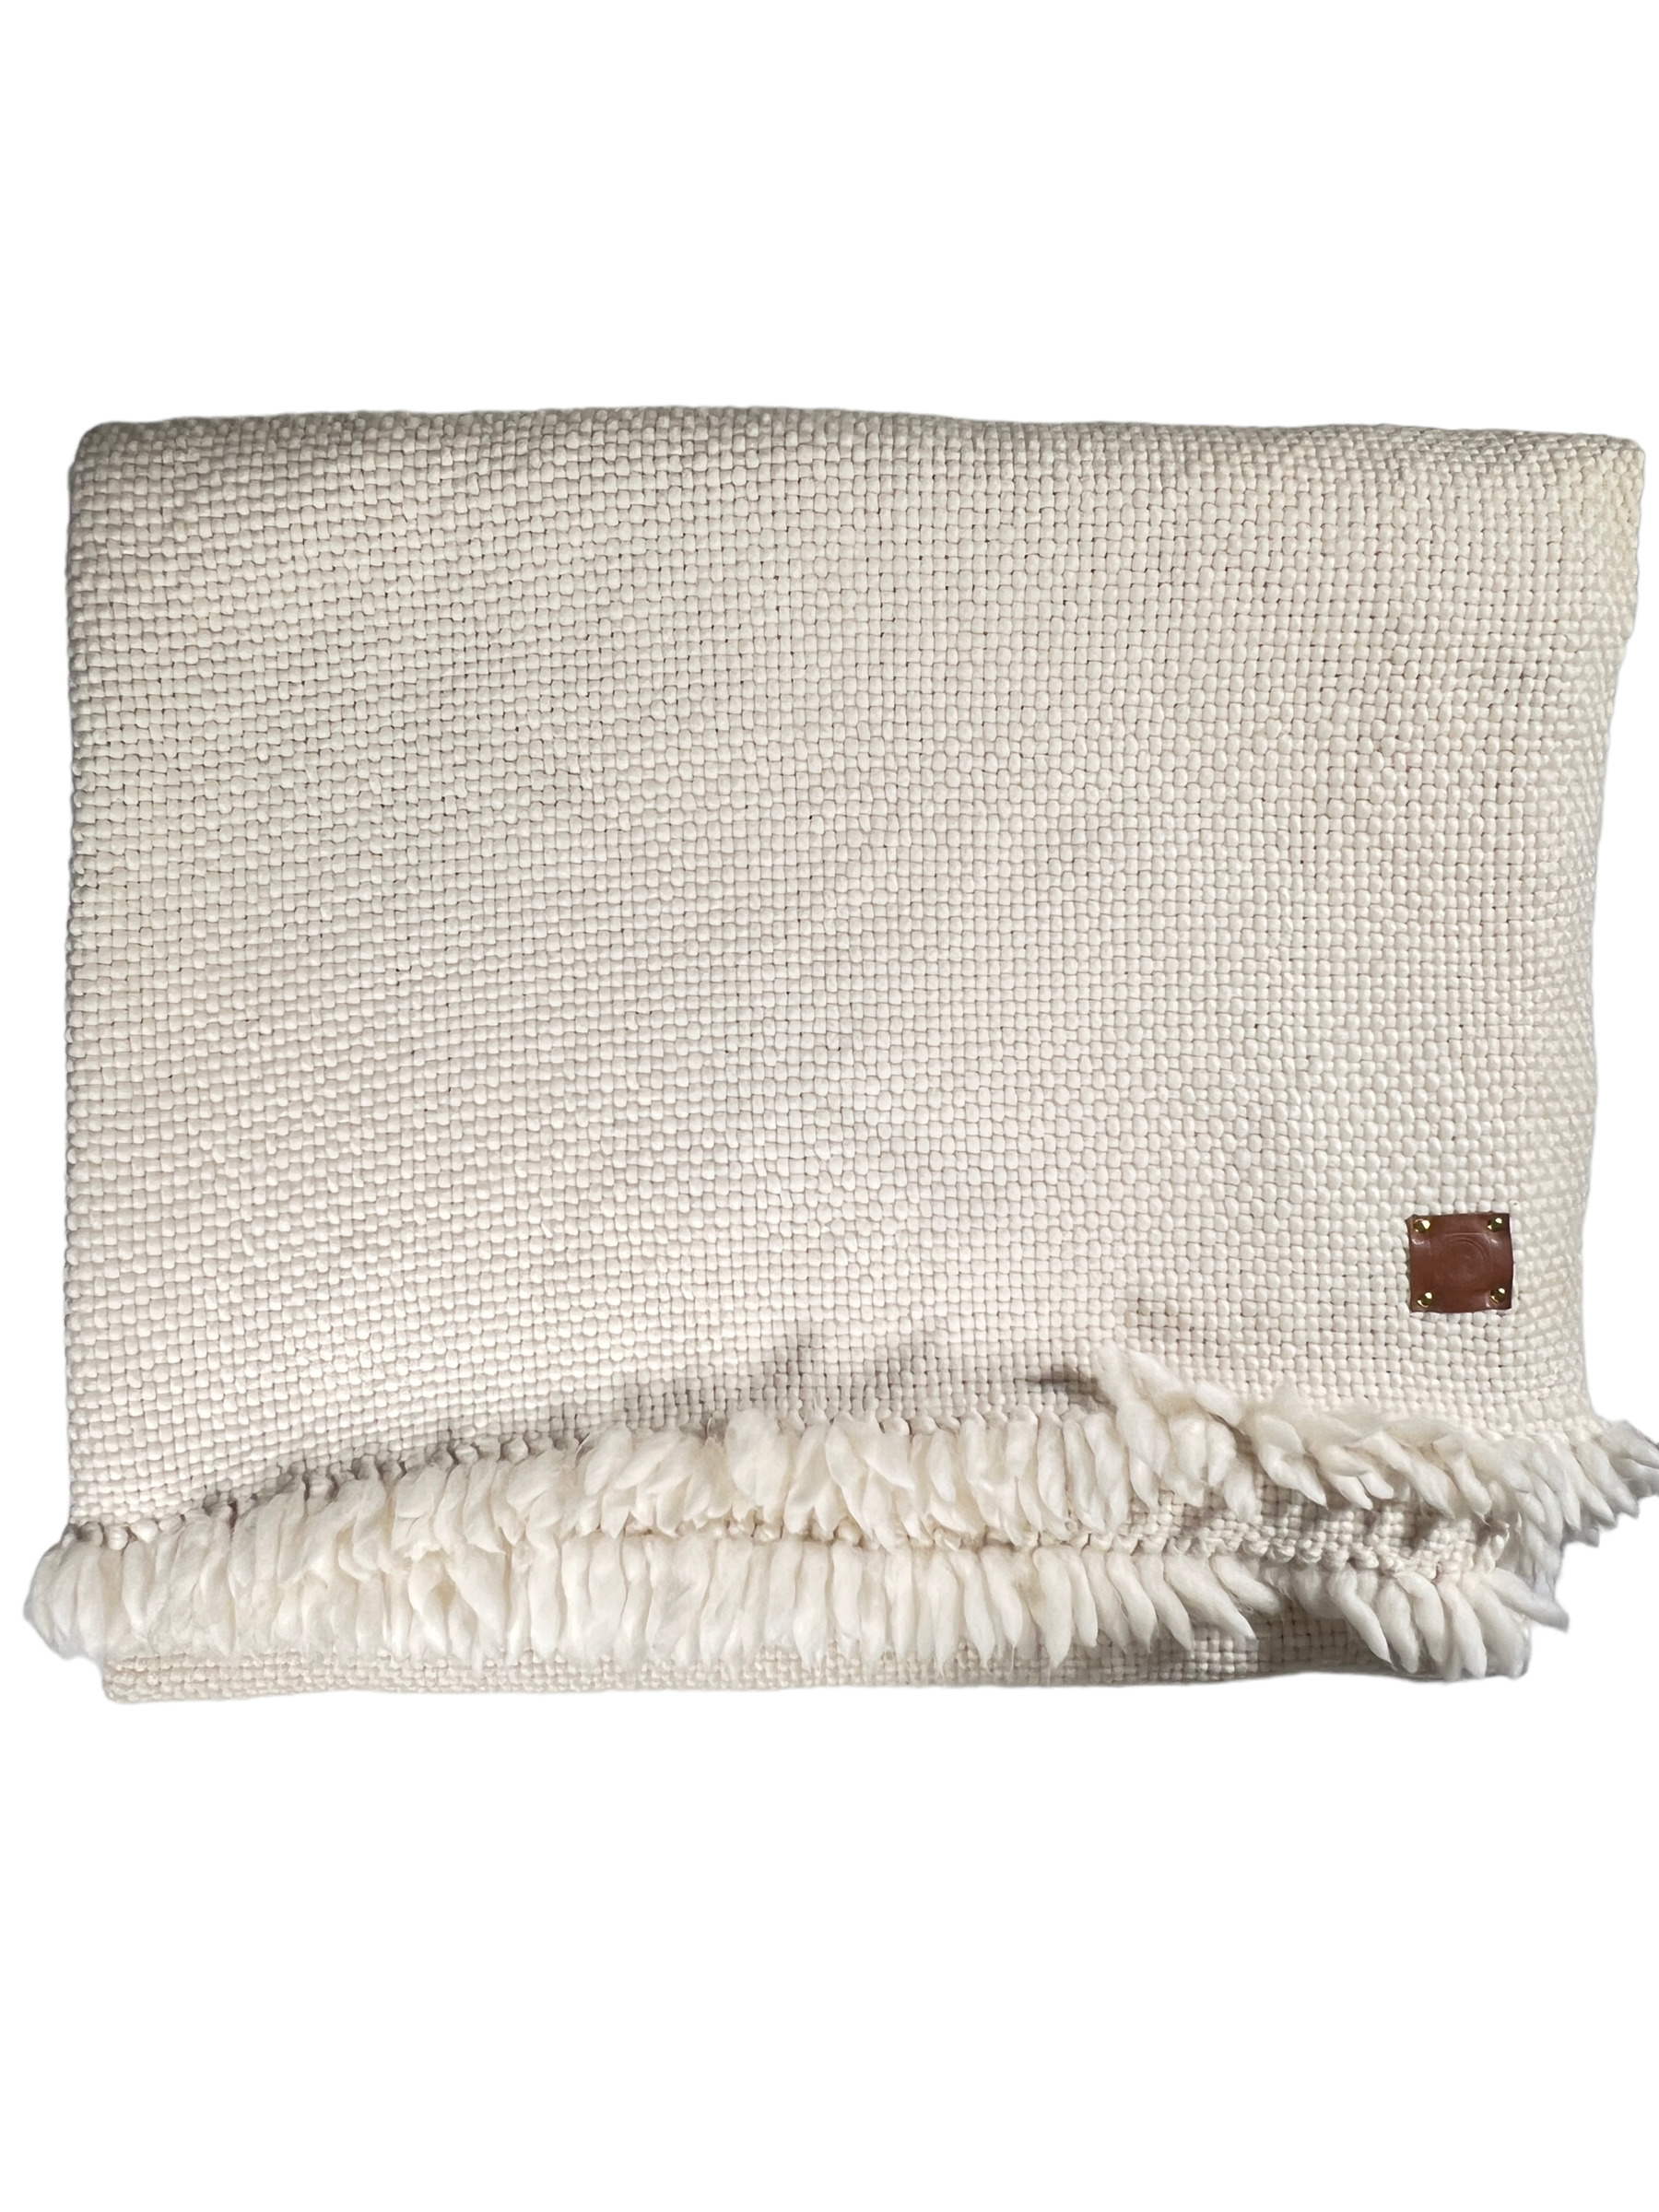 BUTTON DOWN HIGHLANDS MERINO WOOL KNIT THROW - NATURAL